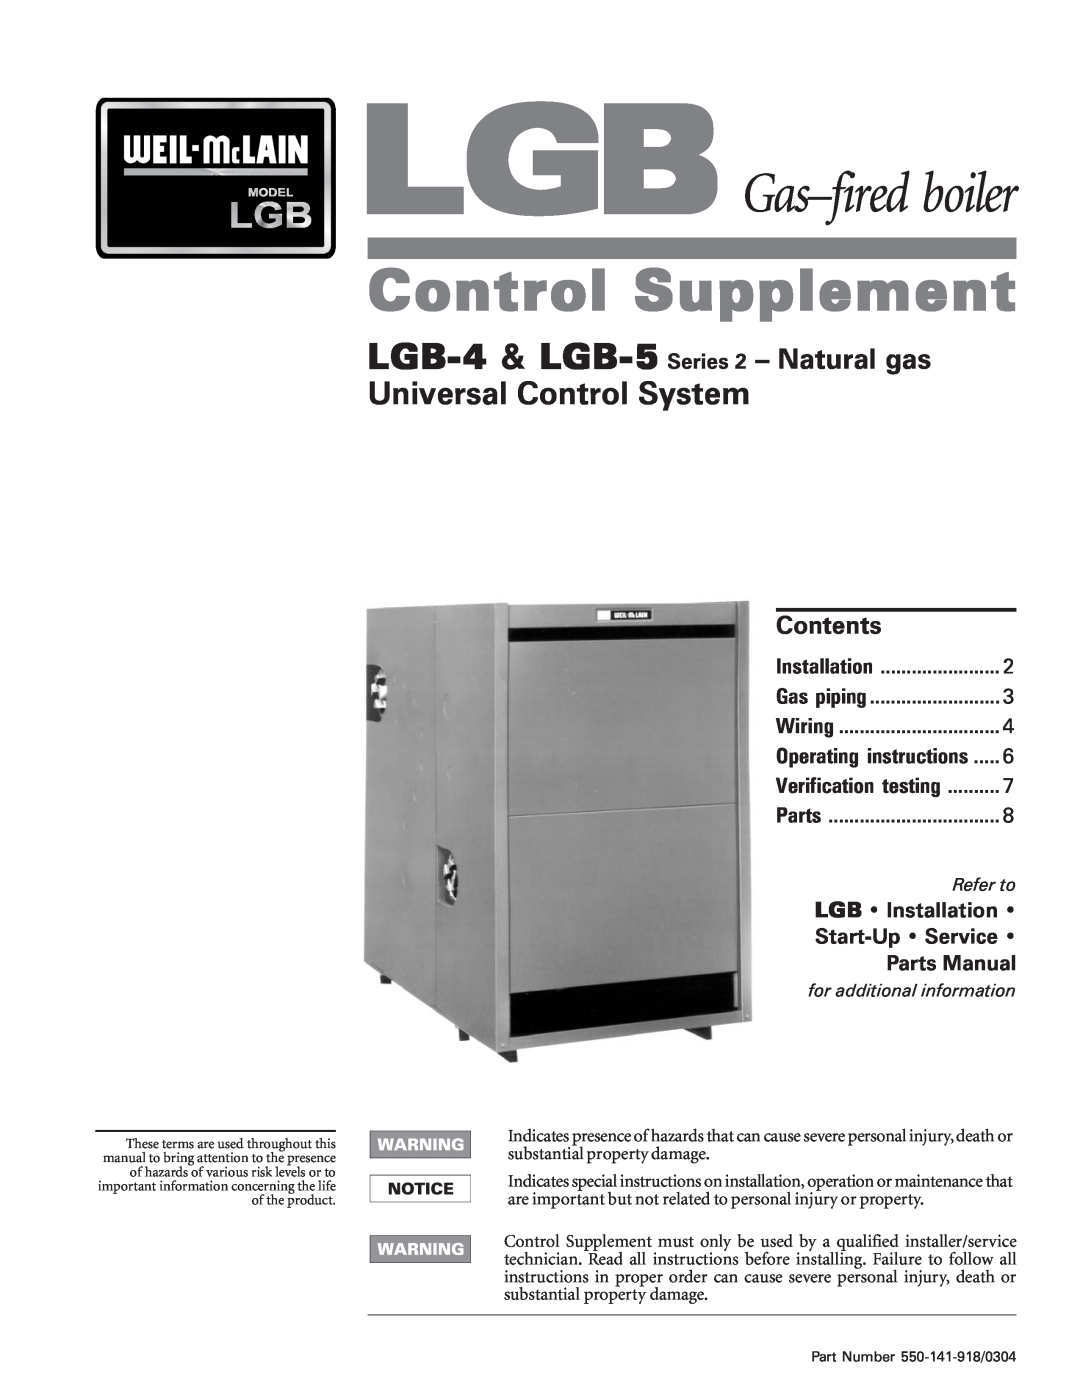 Weil-McLain operating instructions LGB-4& LGB-5 Series 2 - Natural gas, Contents, Installation, Wiring, Parts, Refer to 